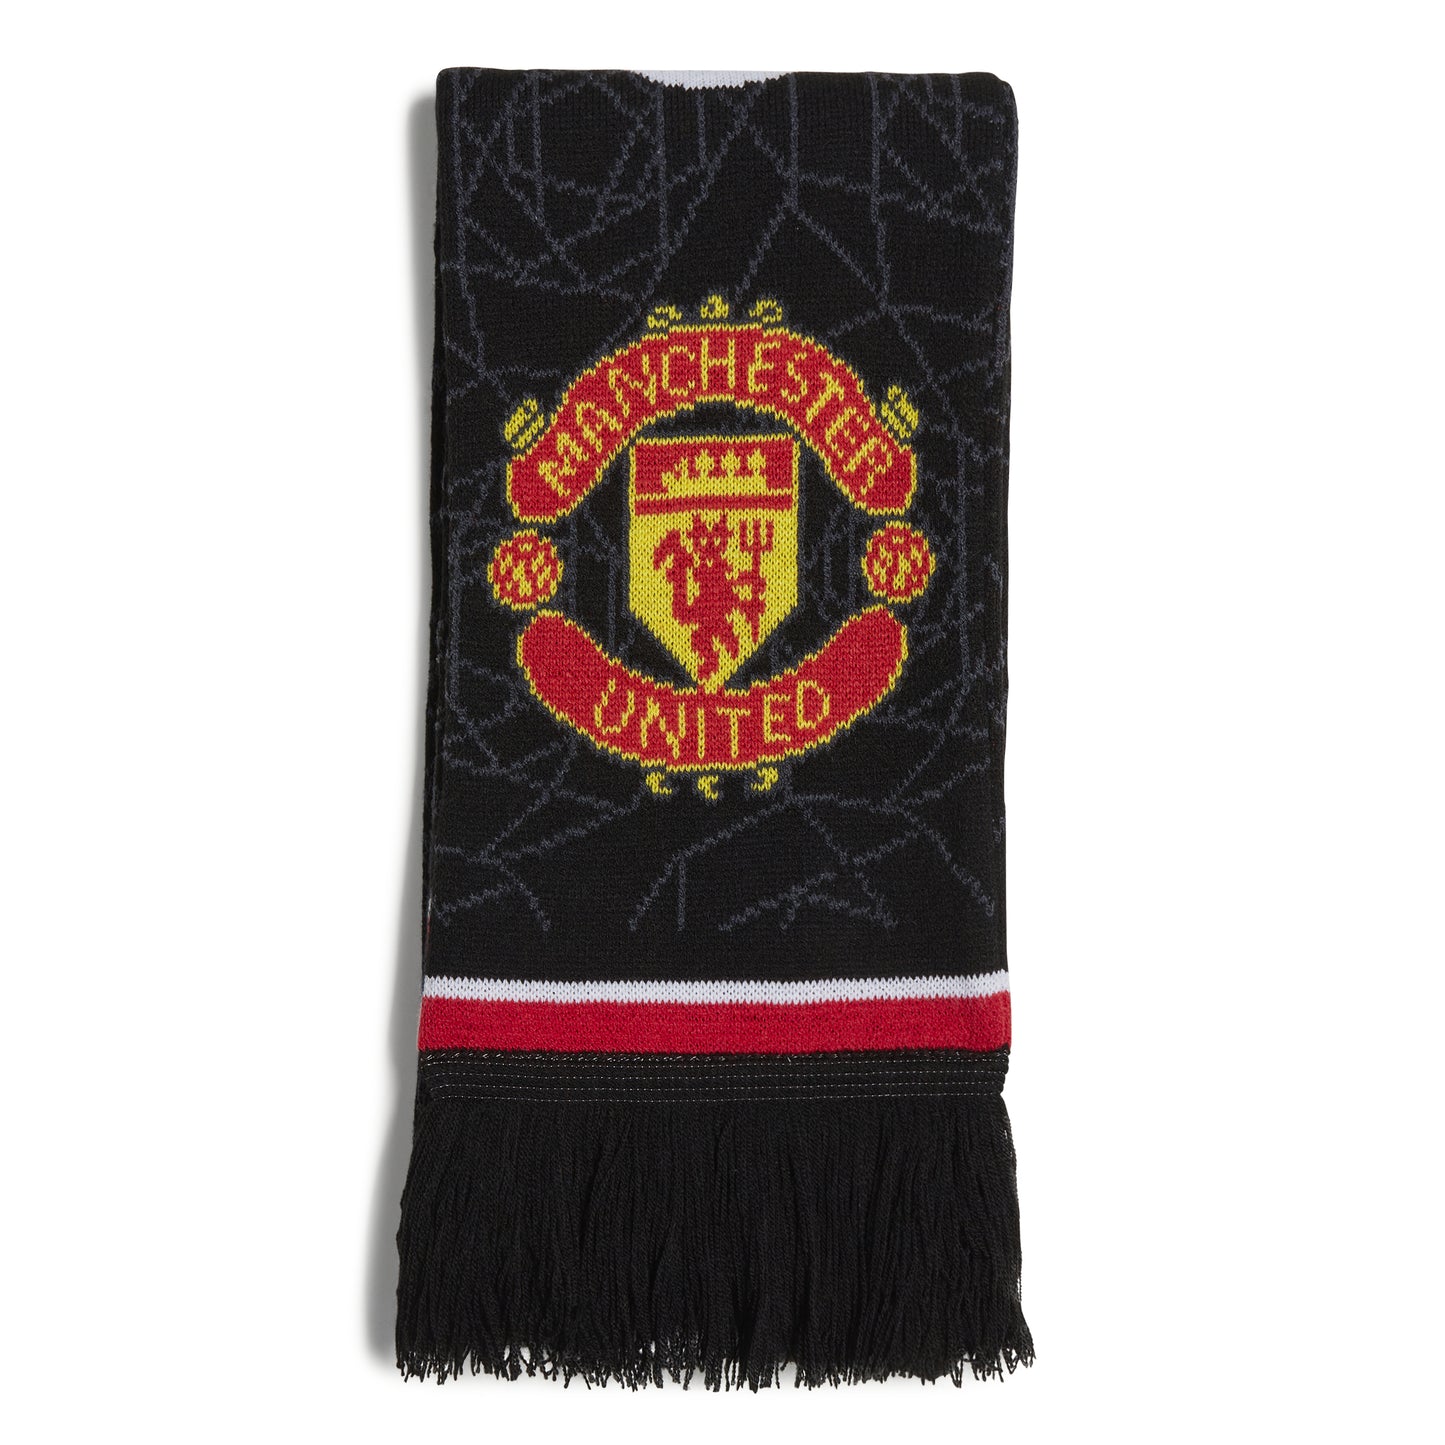 adidas MUFC Manchester United Scarf Home Black White Red